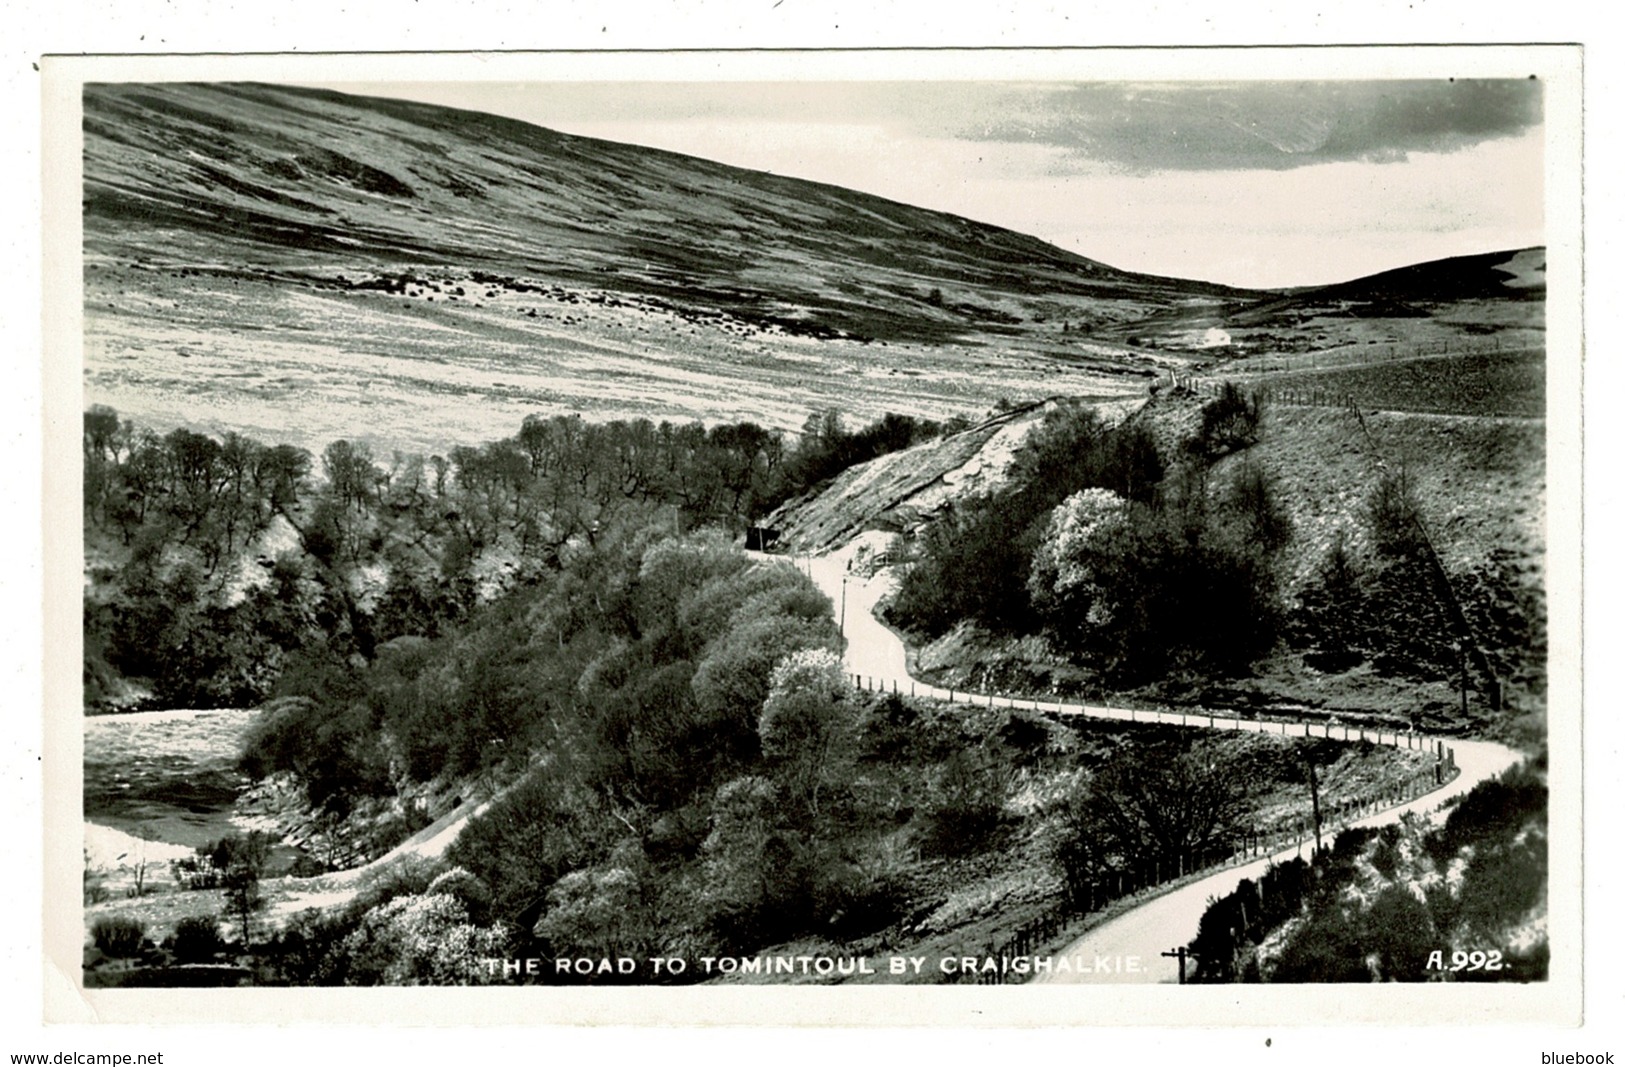 Ref 1358 - Real Photo Postcard - The Road To Tomintoul By Craighalkie - Moray Scotland - Moray